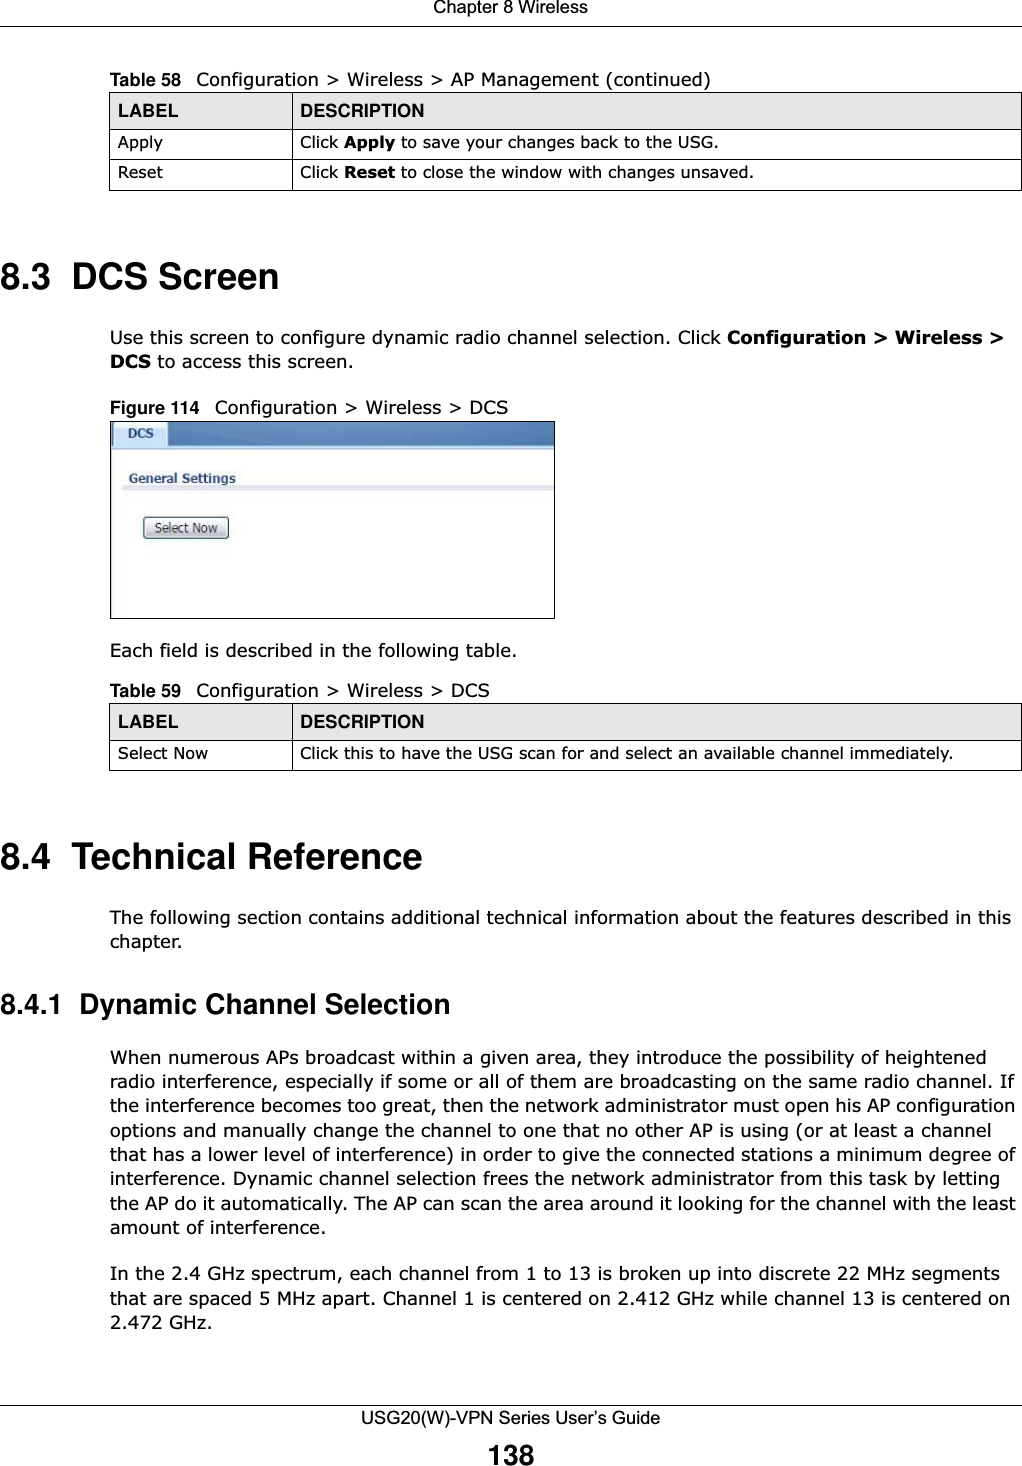 Chapter 8 WirelessUSG20(W)-VPN Series User’s Guide1388.3  DCS Screen Use this screen to configure dynamic radio channel selection. Click Configuration &gt; Wireless &gt; DCS to access this screen.Figure 114   Configuration &gt; Wireless &gt; DCS   Each field is described in the following table.  8.4  Technical ReferenceThe following section contains additional technical information about the features described in this chapter.8.4.1  Dynamic Channel SelectionWhen numerous APs broadcast within a given area, they introduce the possibility of heightened radio interference, especially if some or all of them are broadcasting on the same radio channel. If the interference becomes too great, then the network administrator must open his AP configuration options and manually change the channel to one that no other AP is using (or at least a channel that has a lower level of interference) in order to give the connected stations a minimum degree of interference. Dynamic channel selection frees the network administrator from this task by letting the AP do it automatically. The AP can scan the area around it looking for the channel with the least amount of interference.In the 2.4 GHz spectrum, each channel from 1 to 13 is broken up into discrete 22 MHz segments that are spaced 5 MHz apart. Channel 1 is centered on 2.412 GHz while channel 13 is centered on 2.472 GHz.Apply Click Apply to save your changes back to the USG.Reset Click Reset to close the window with changes unsaved. Table 58   Configuration &gt; Wireless &gt; AP Management (continued)LABEL DESCRIPTIONTable 59   Configuration &gt; Wireless &gt; DCSLABEL DESCRIPTIONSelect Now Click this to have the USG scan for and select an available channel immediately.